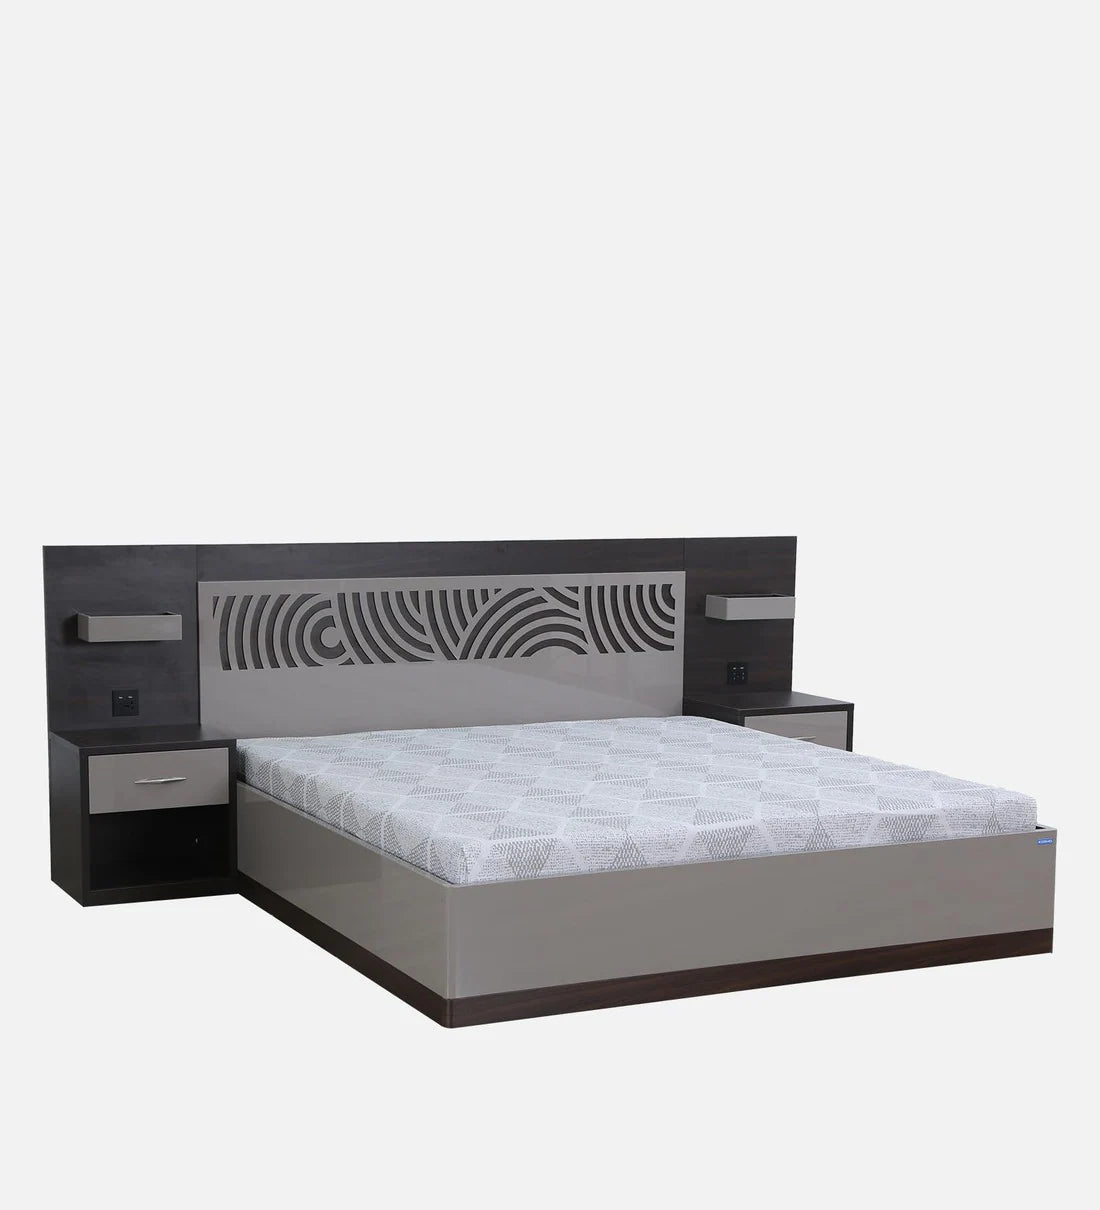 Ripple King Size Bed in High Gloss Grey Finish with Hydraulic Storage